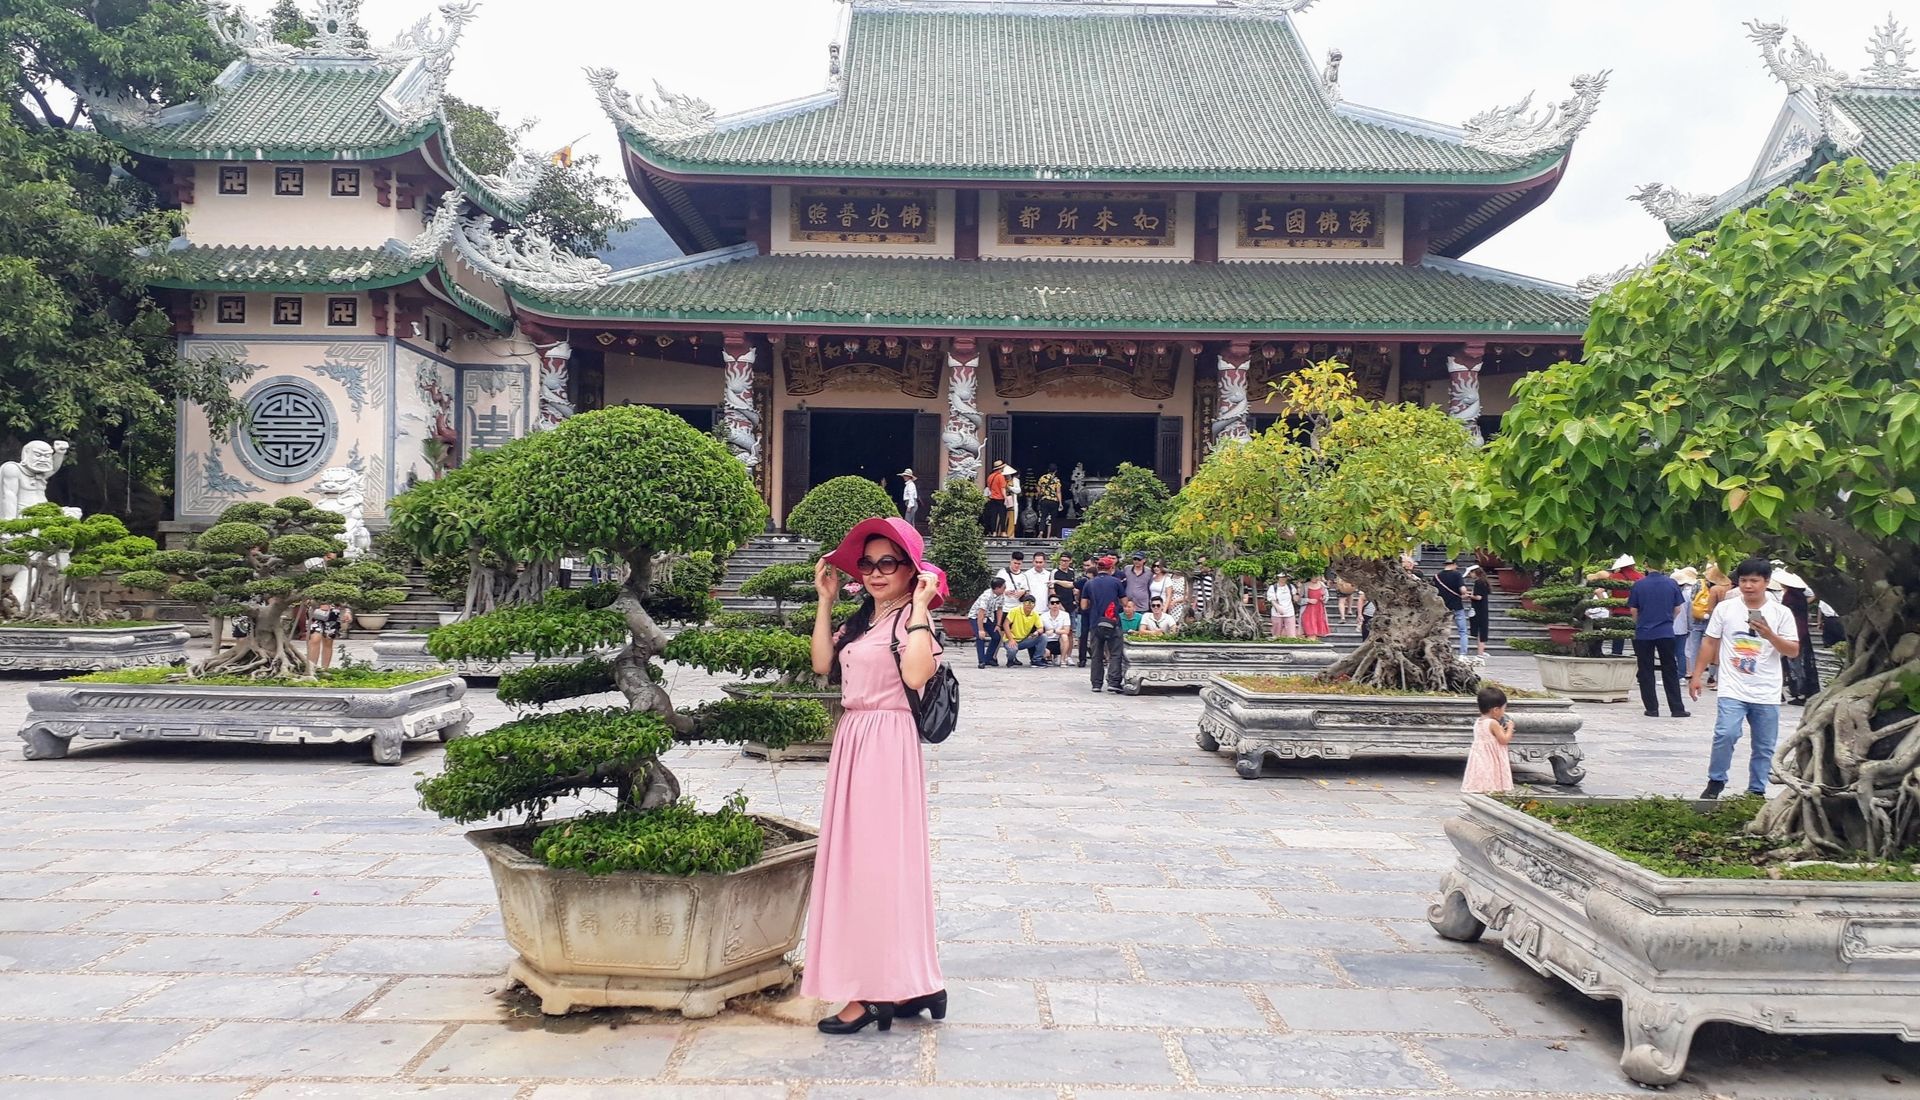 Selfie time at the Linh Ung Pagoda Complex